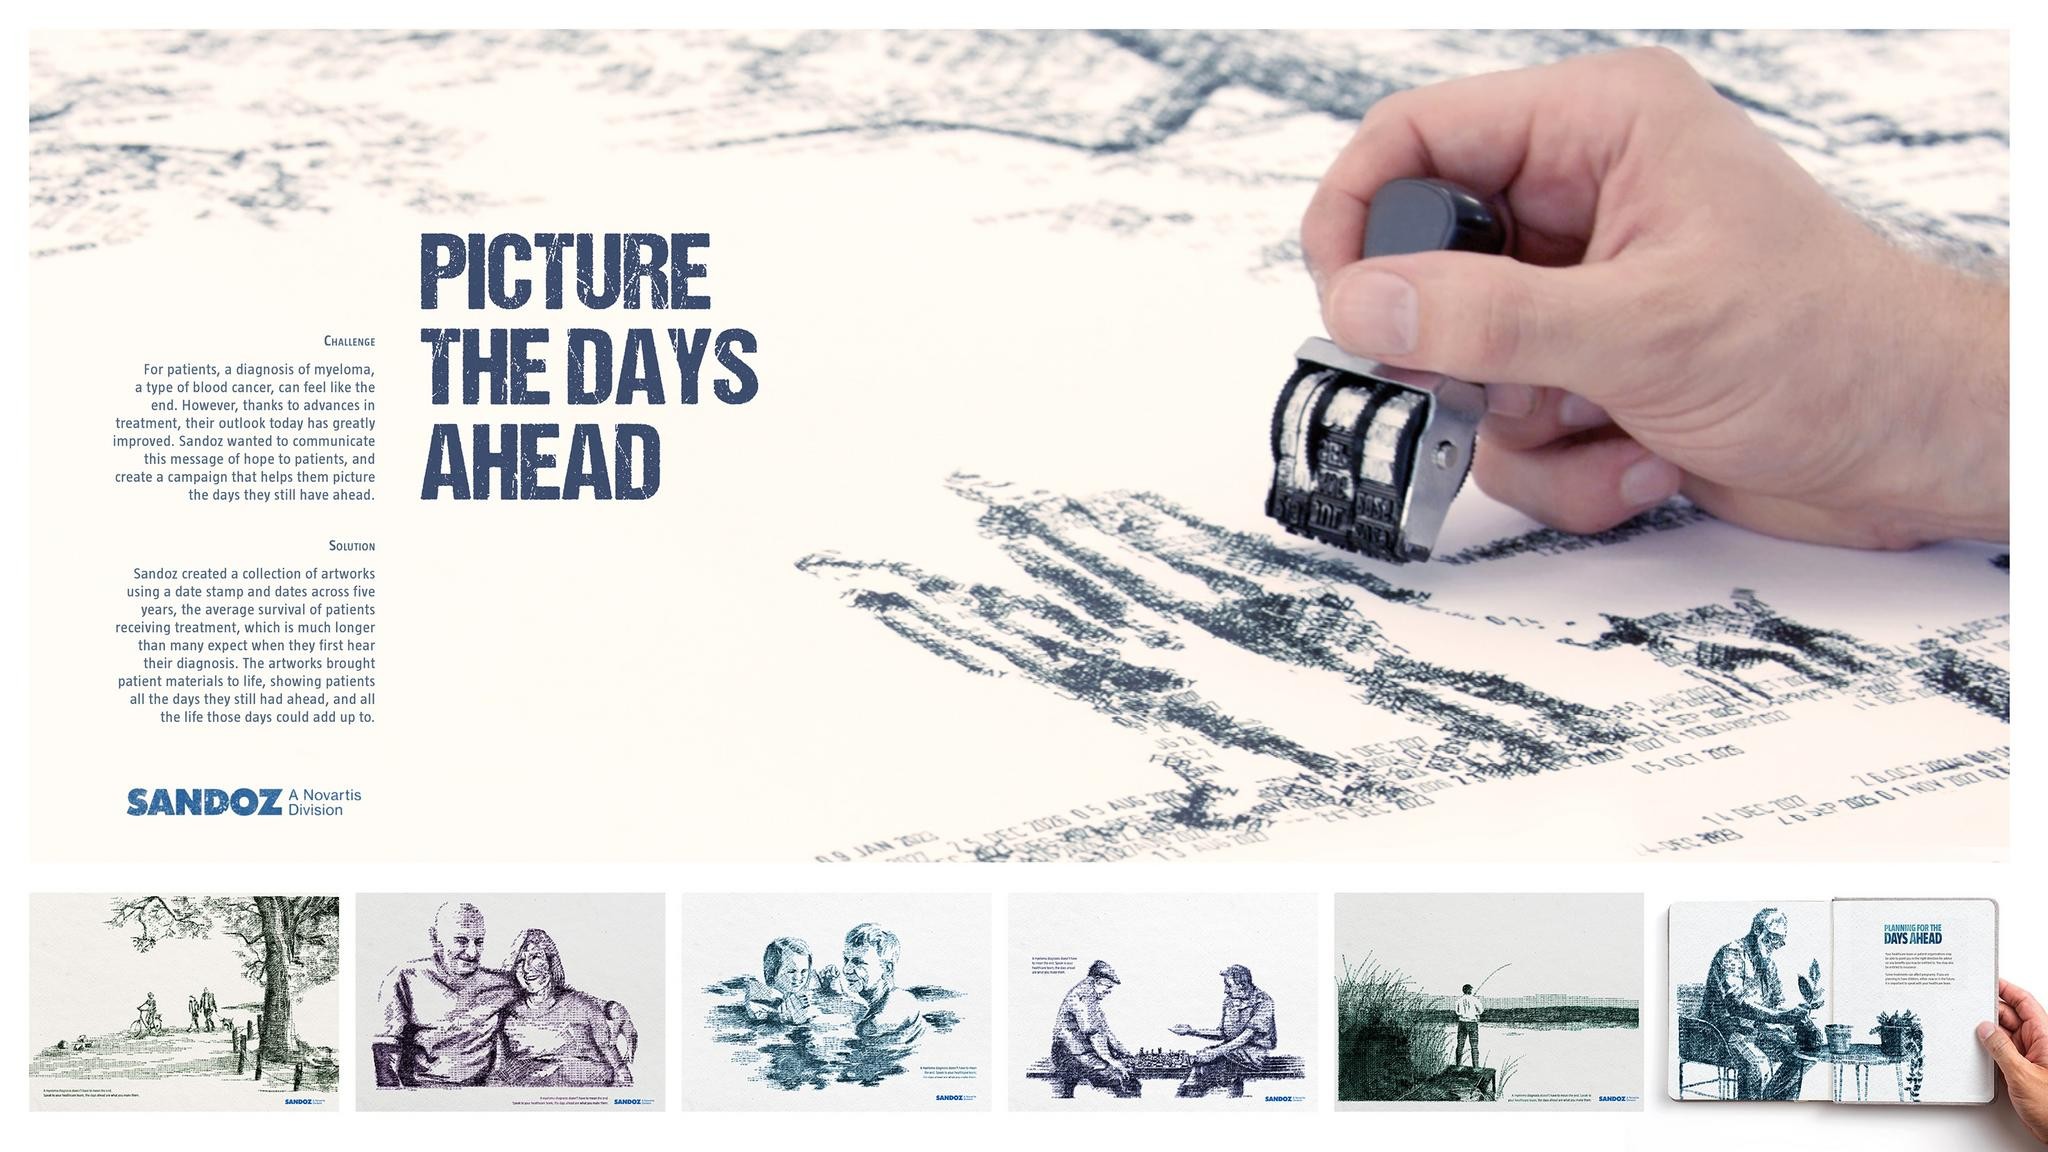 LENALIDOMIDE - Picture the Days Ahead (Patient Booklet) - FCB HEALTH EUROPE - Cannes Lions 2023 (Supporting Images from The Work - 1552806-22487378) (1)